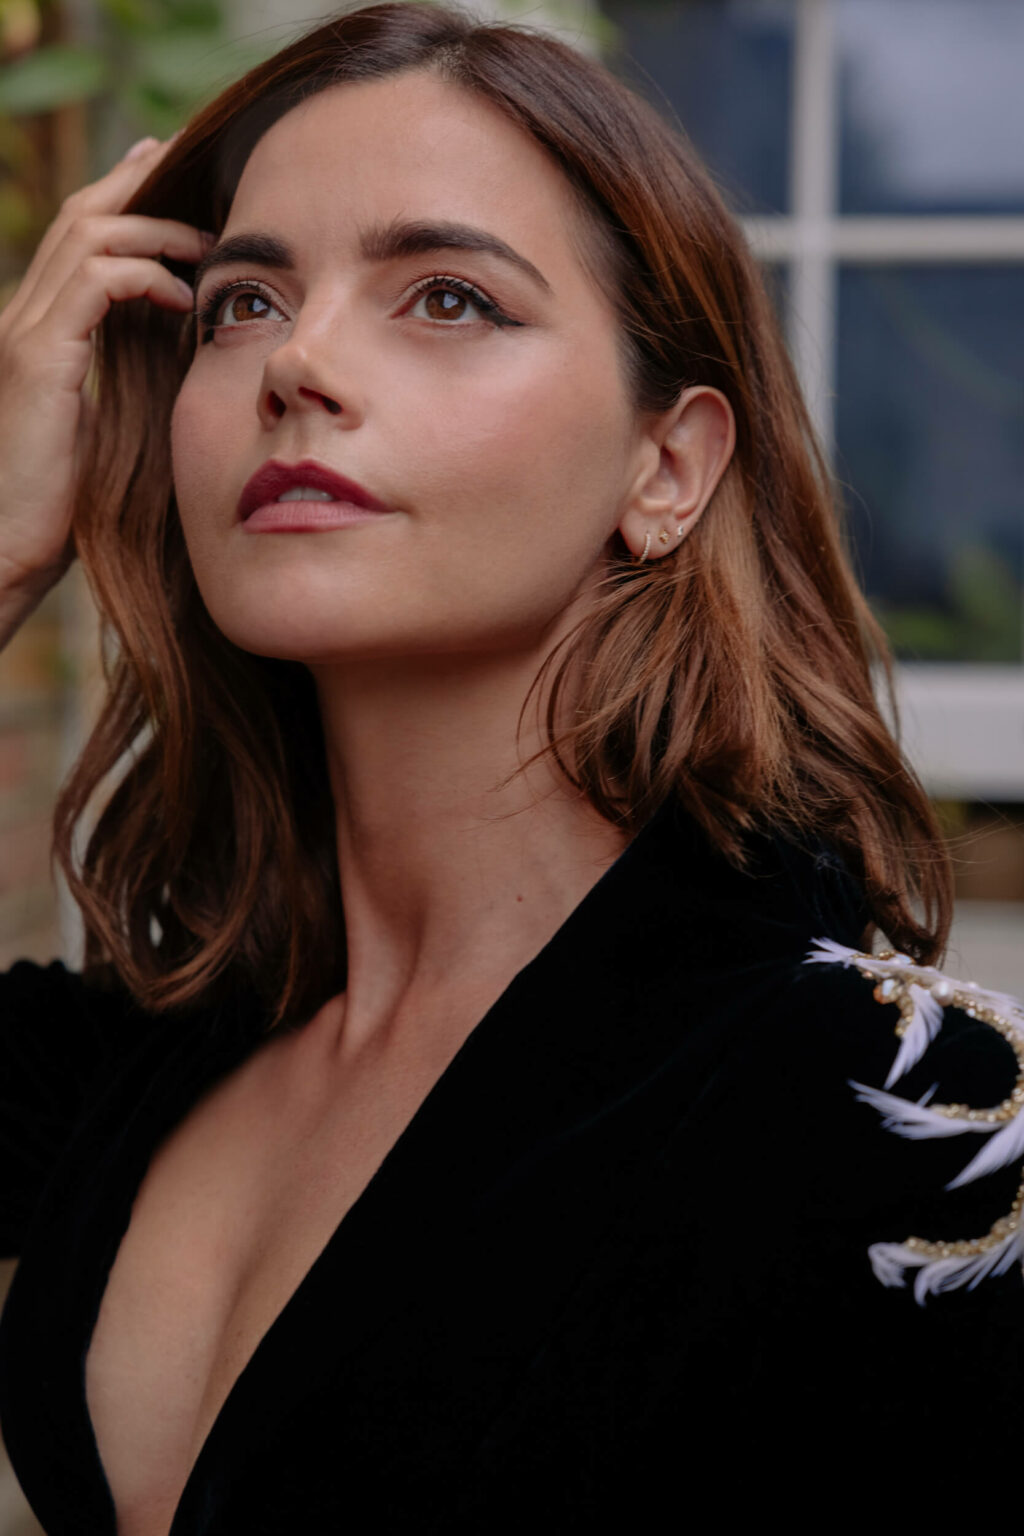 Interview with Jenna Coleman: A ‘Fucking Wild’ Journey – The Italian Rêve